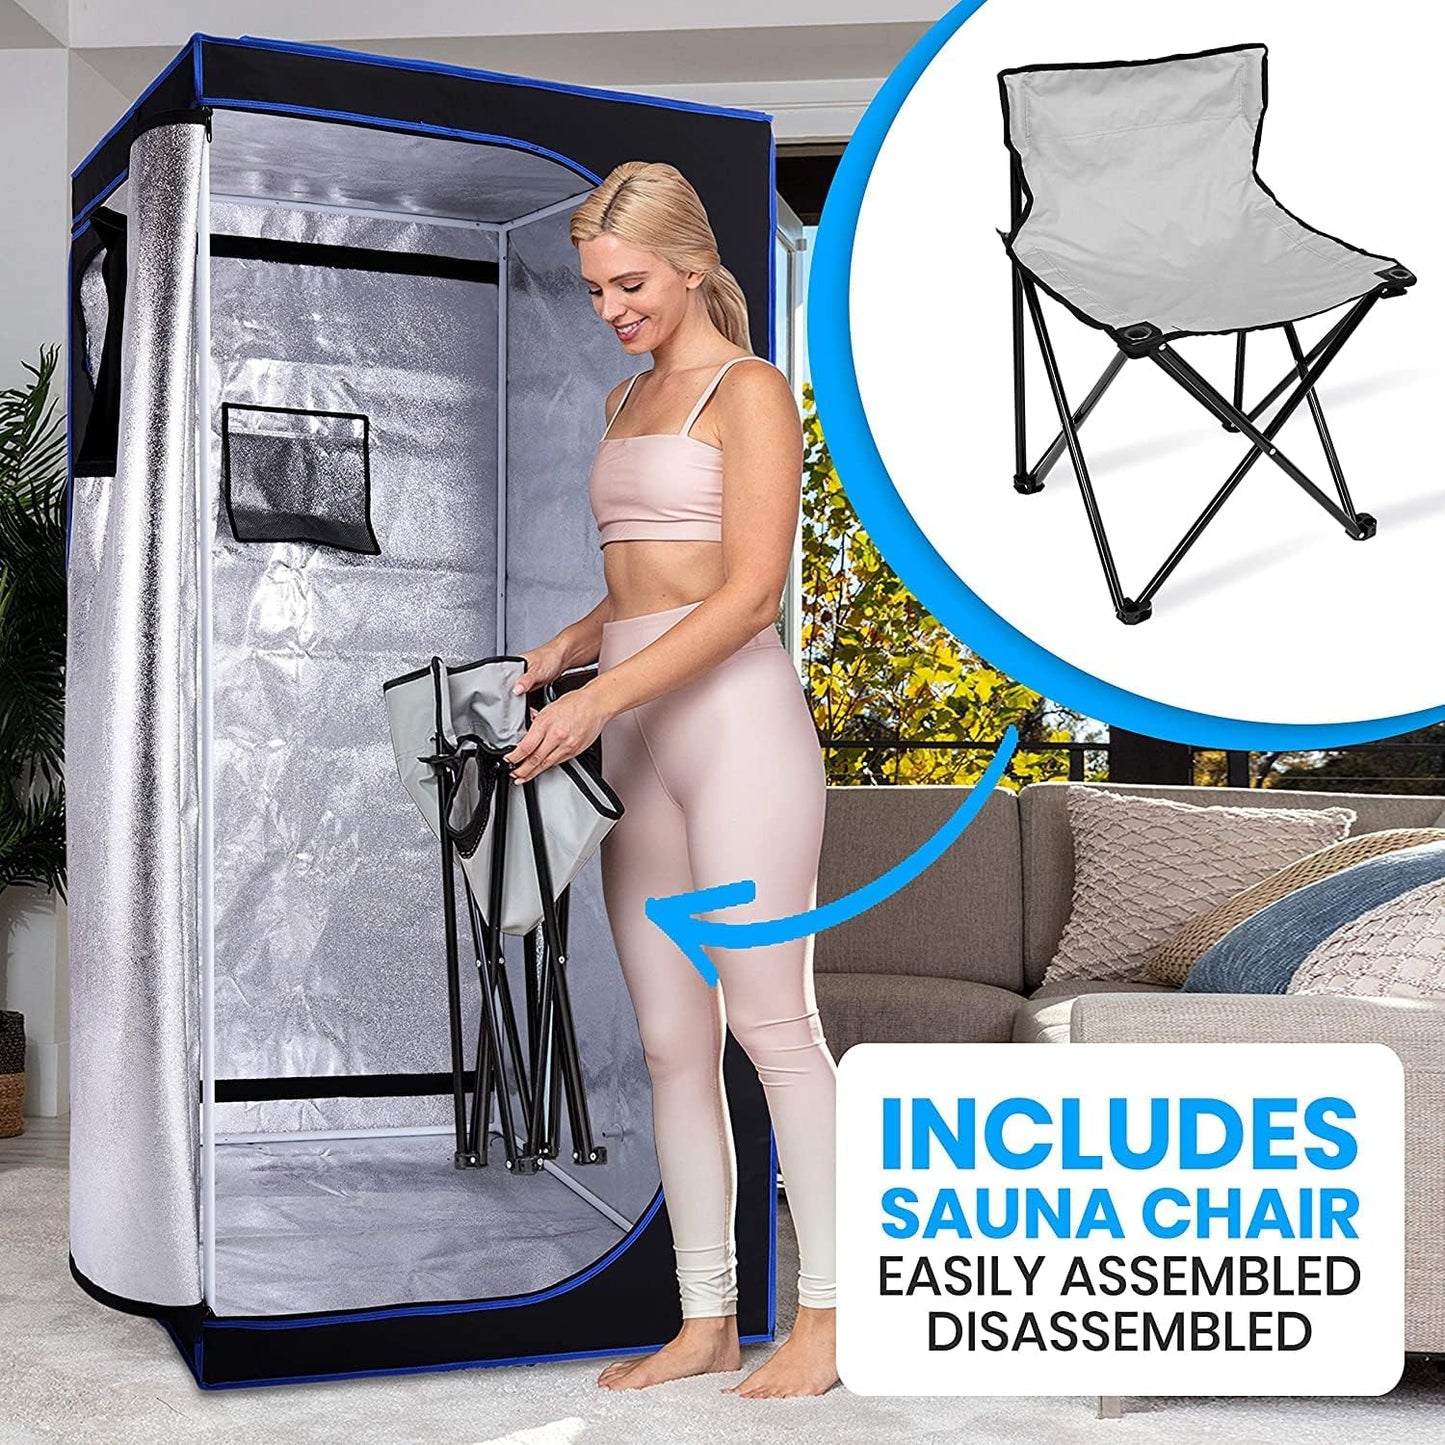 SereneLife Full Size Portable Steam Sauna –Personal Home Spa, with Remote Control, Foldable Chair, Timer